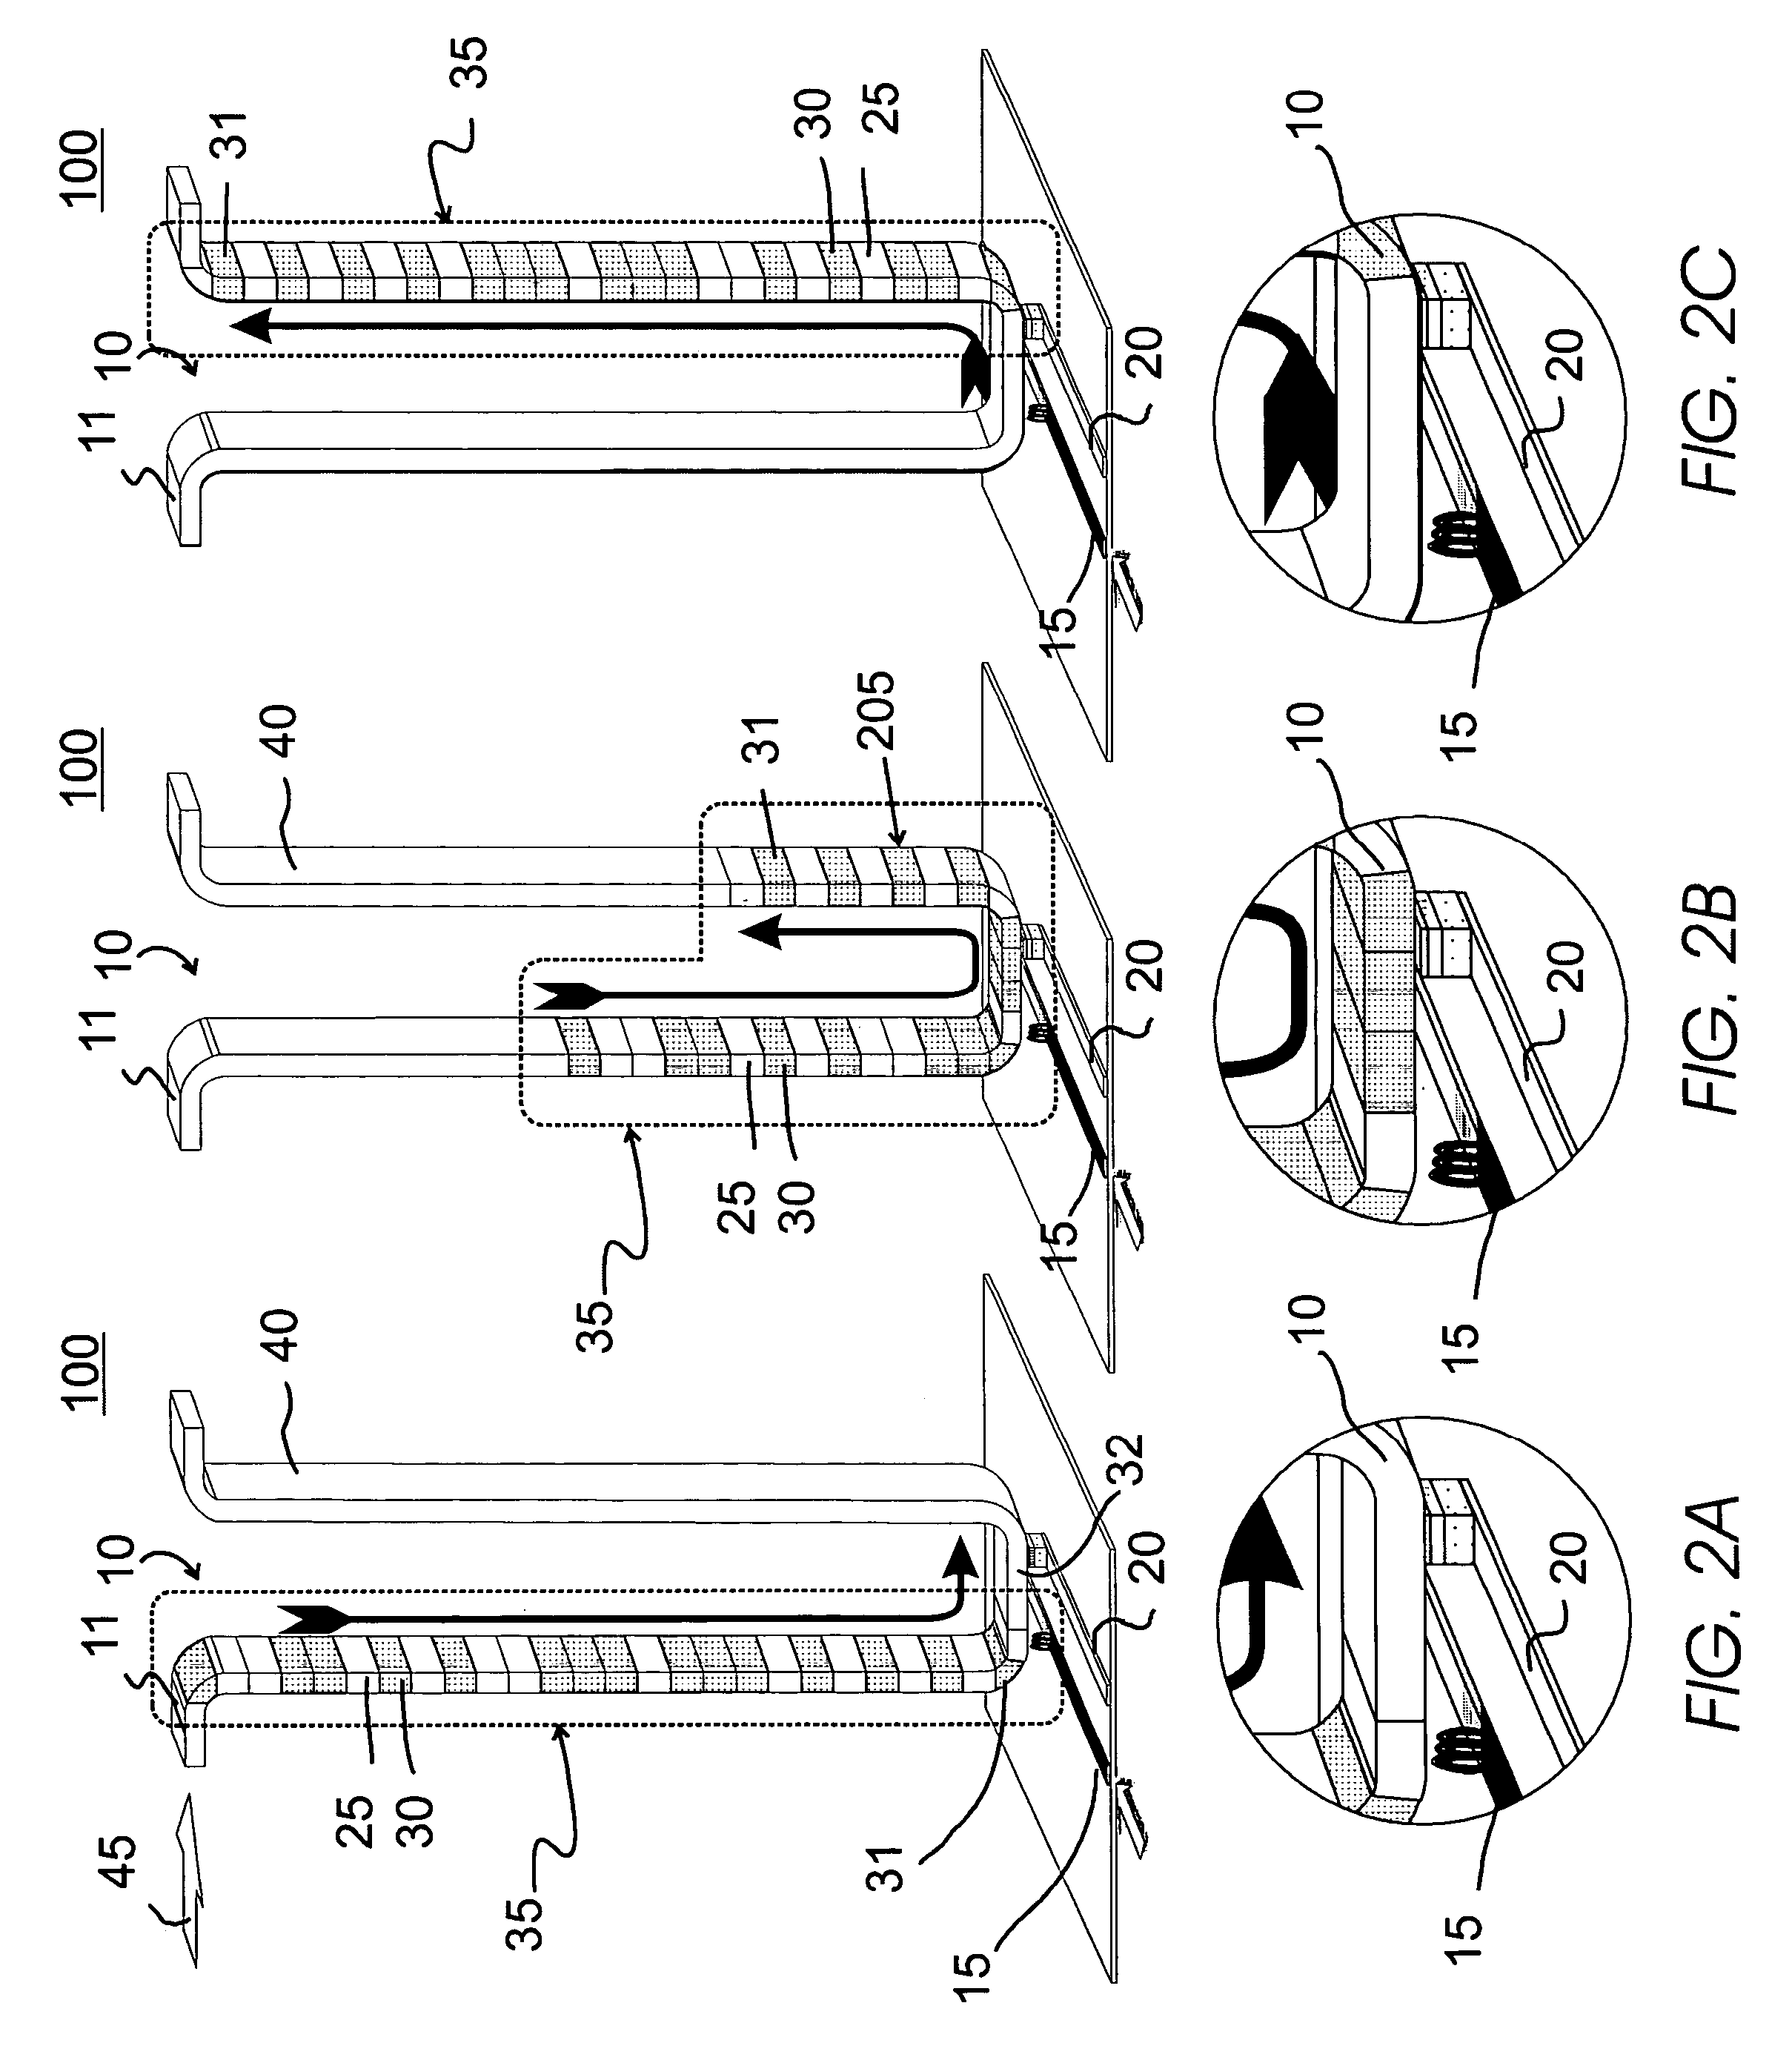 Method of fabricating data tracks for use in a magnetic shift register memory device